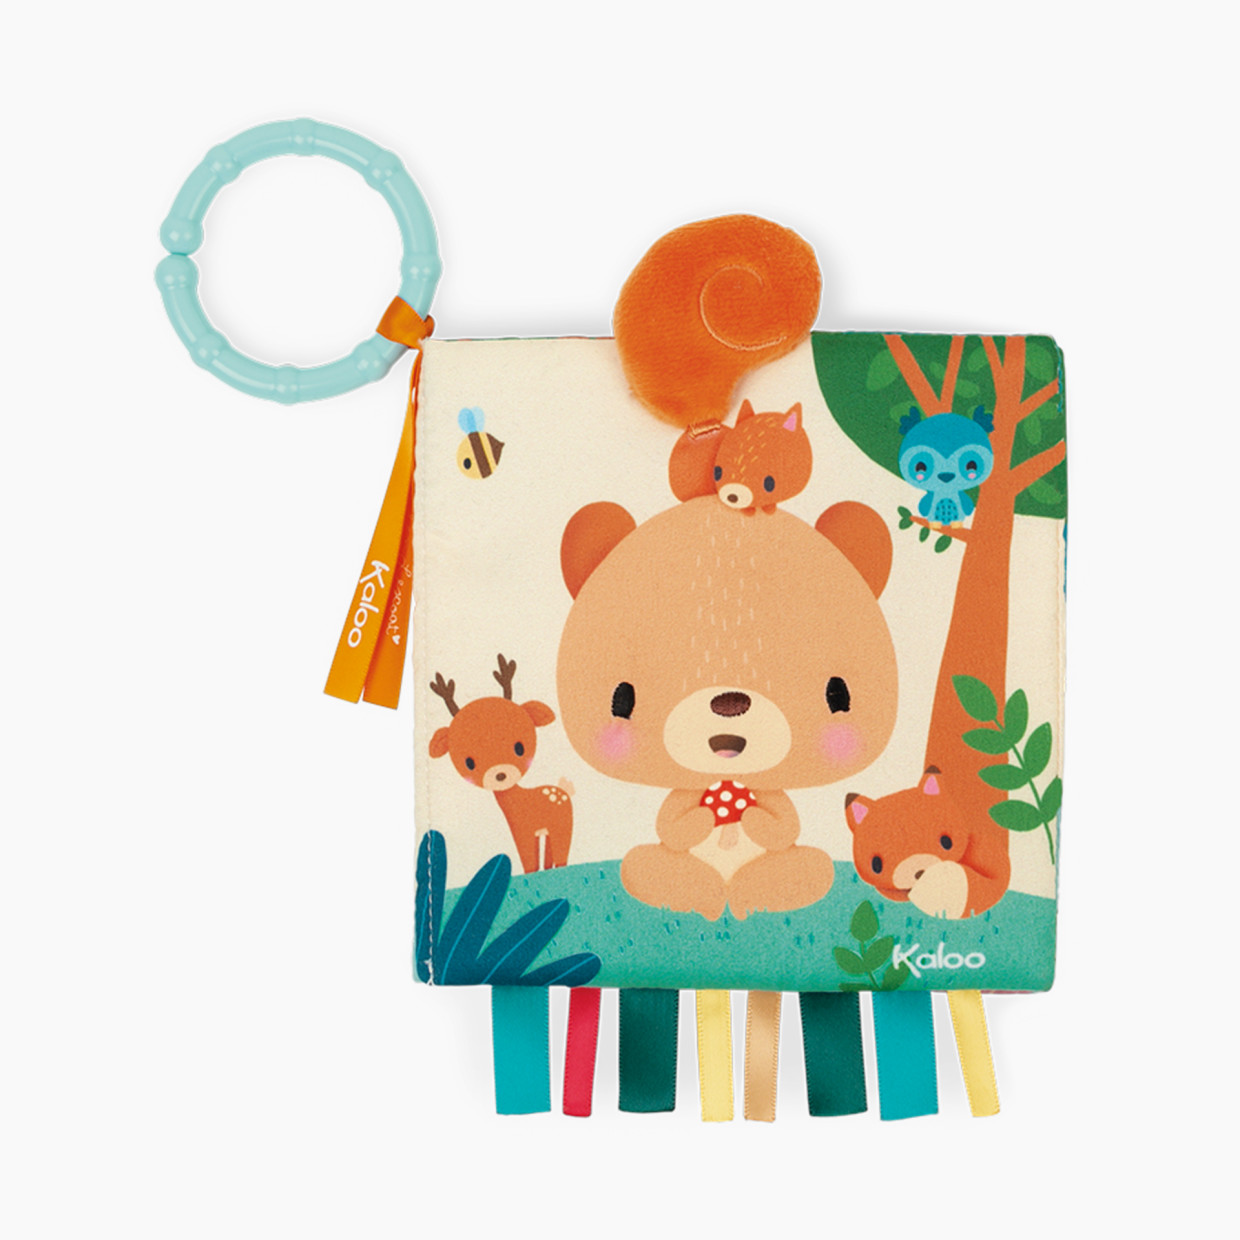 Kaloo Soft Activity Book - Choo In The Forest.